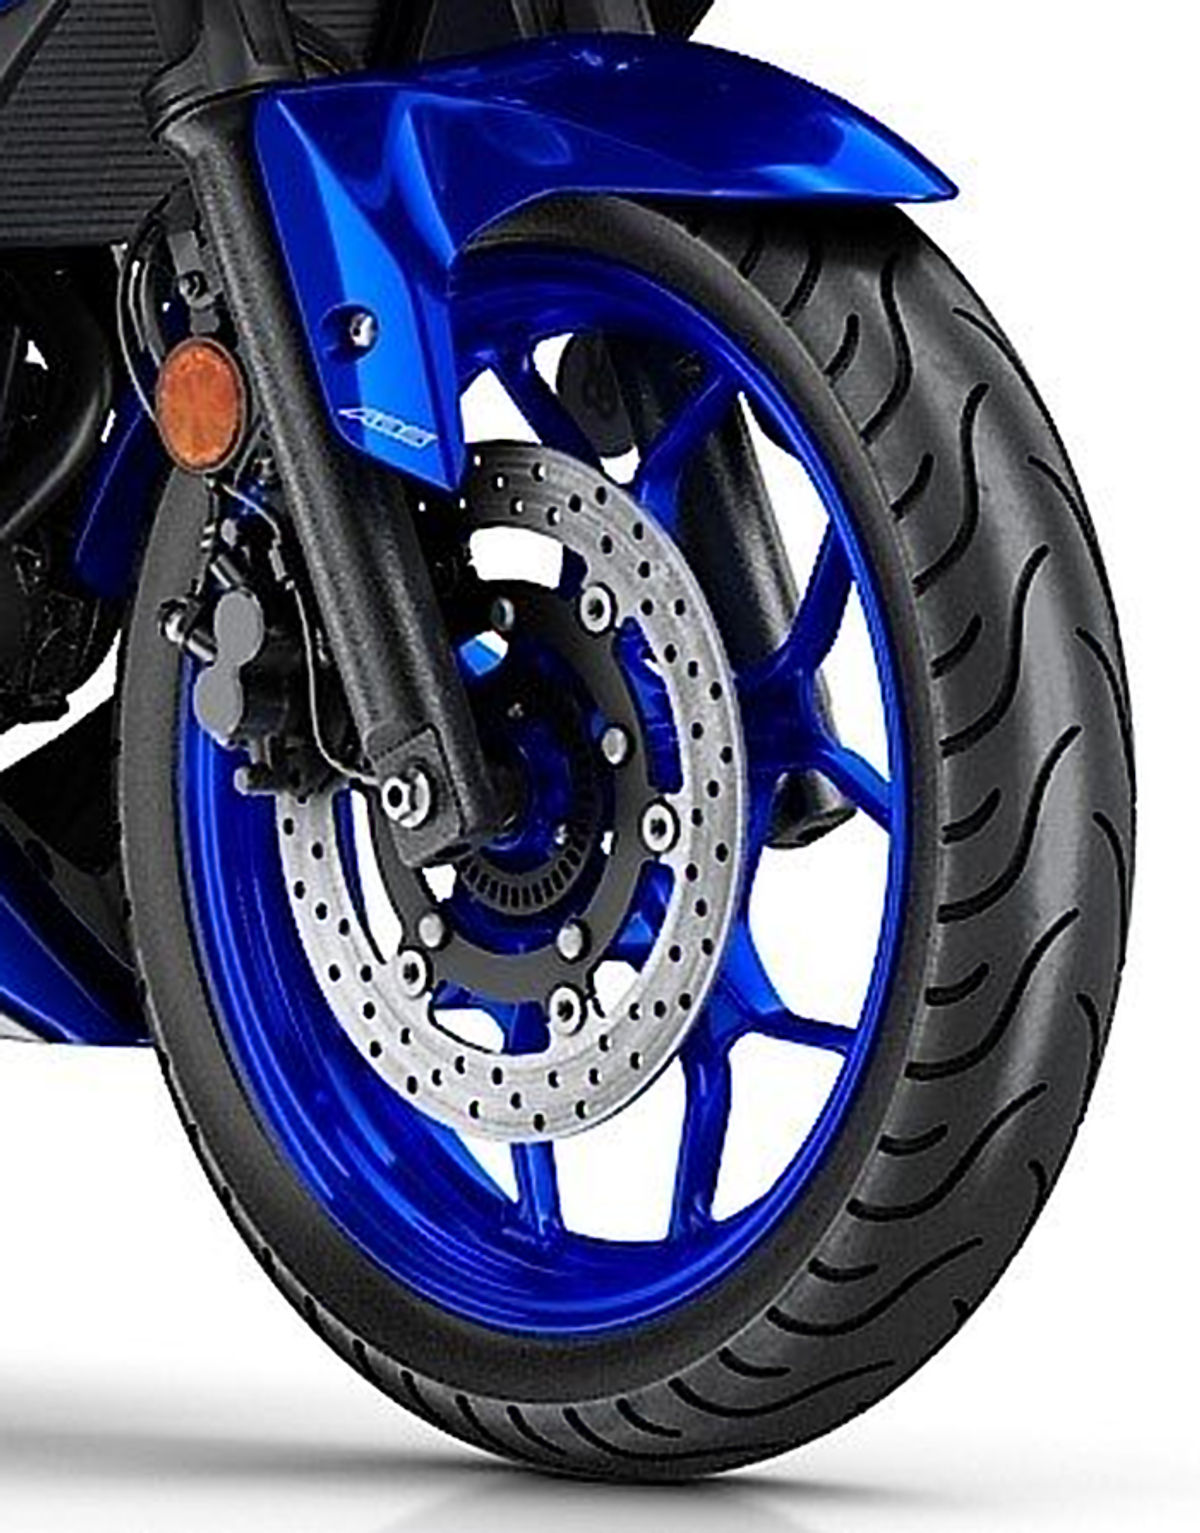 Yamaha To Offer ABS On All Bikes From February Yamaha To Offer ABS On All Bikes From February